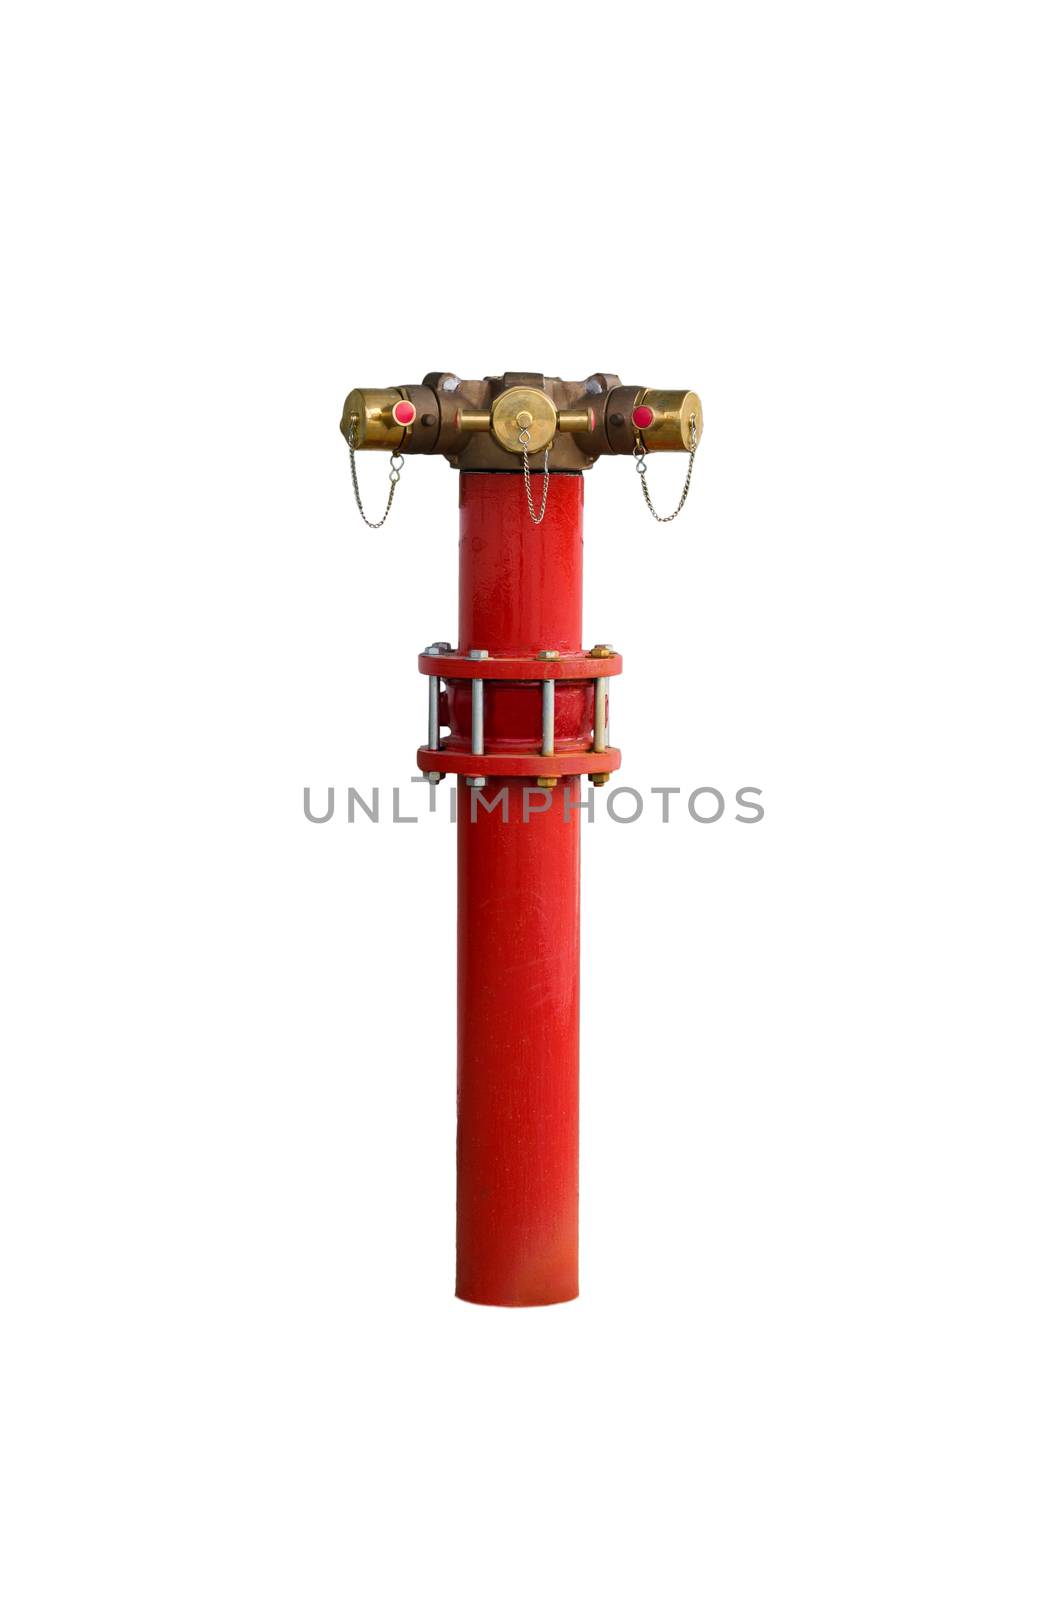 Red metallic fire hydrant Connection on street isolated on white by siraanamwong